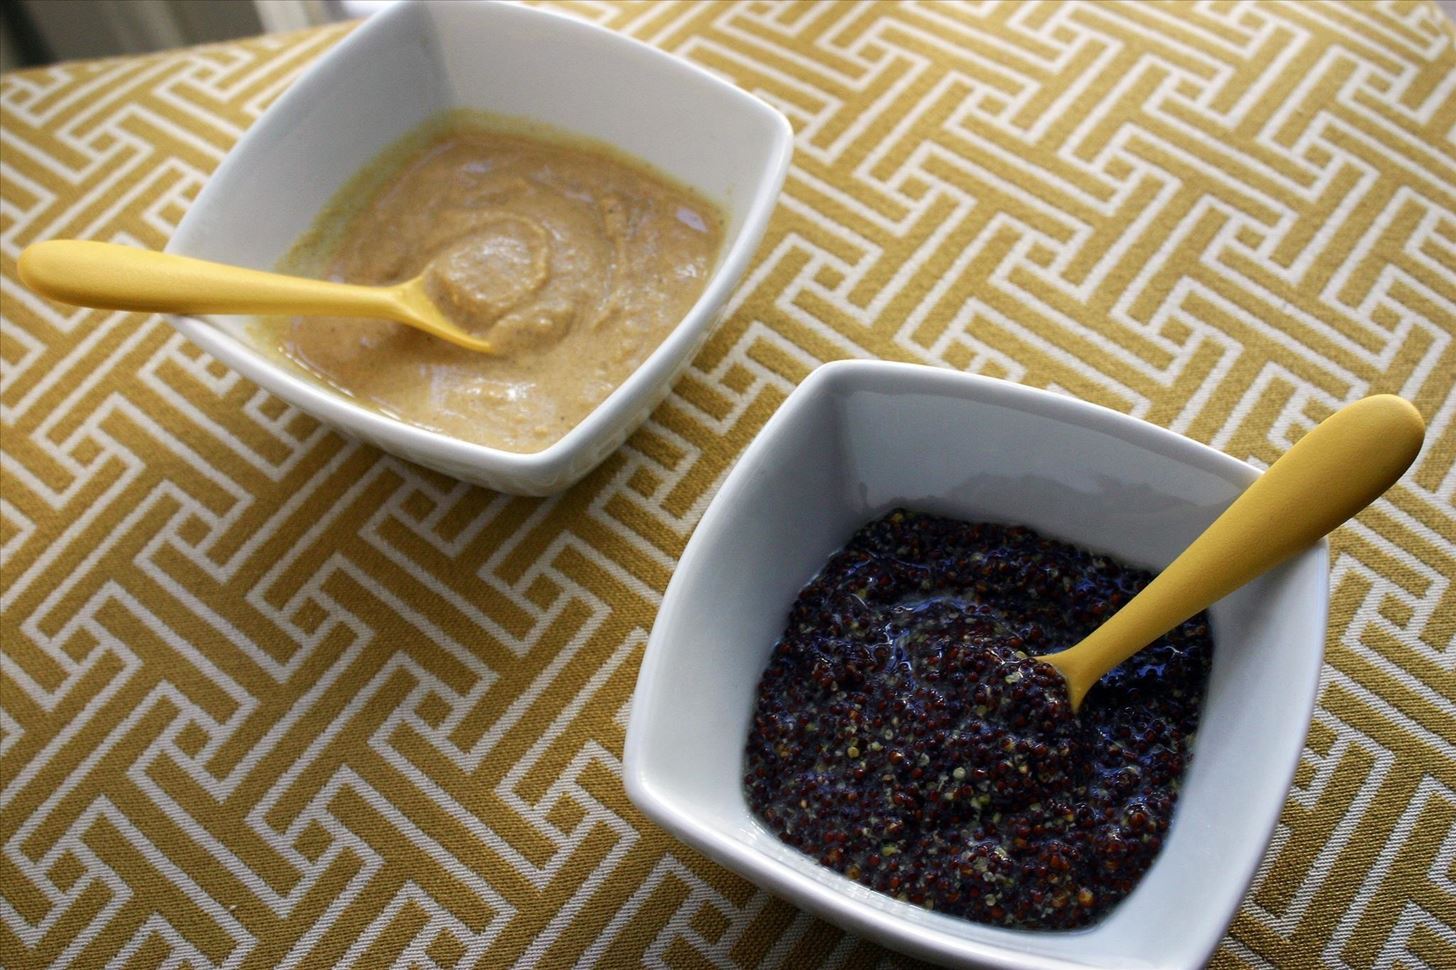 How to Make Your Own Dijon Mustard (Or Any Other Mustard Variety)